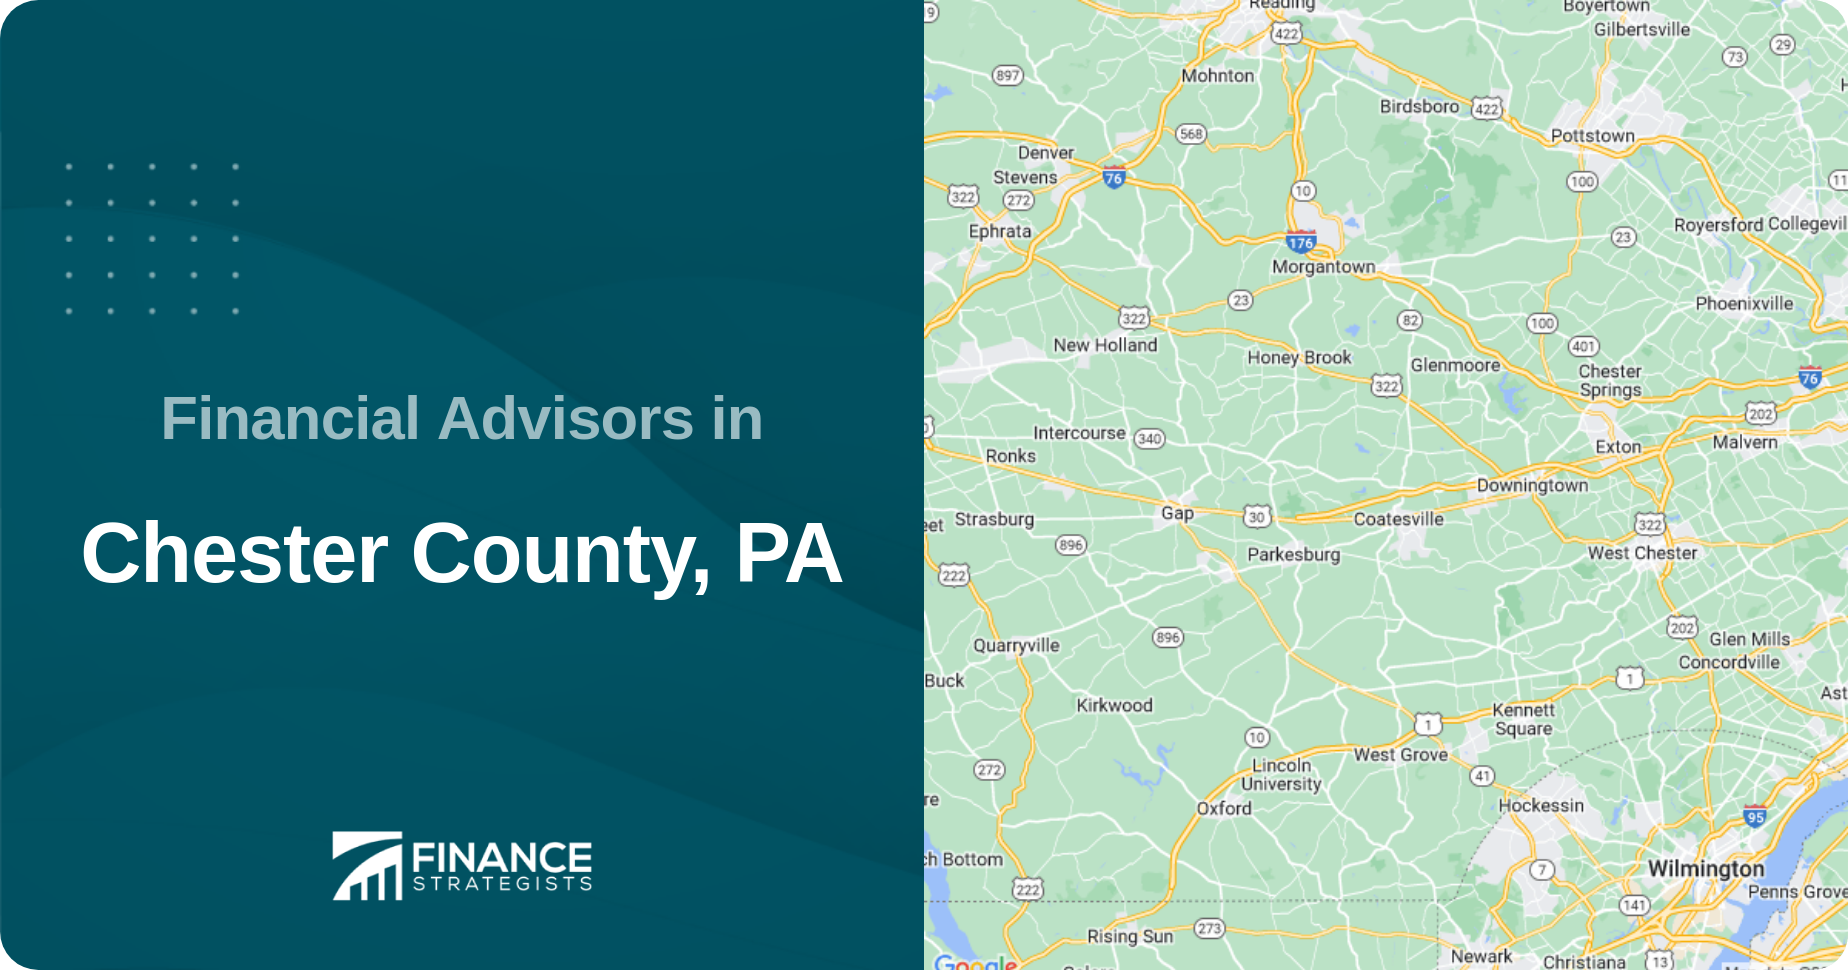 Financial Advisors in Chester County, PA